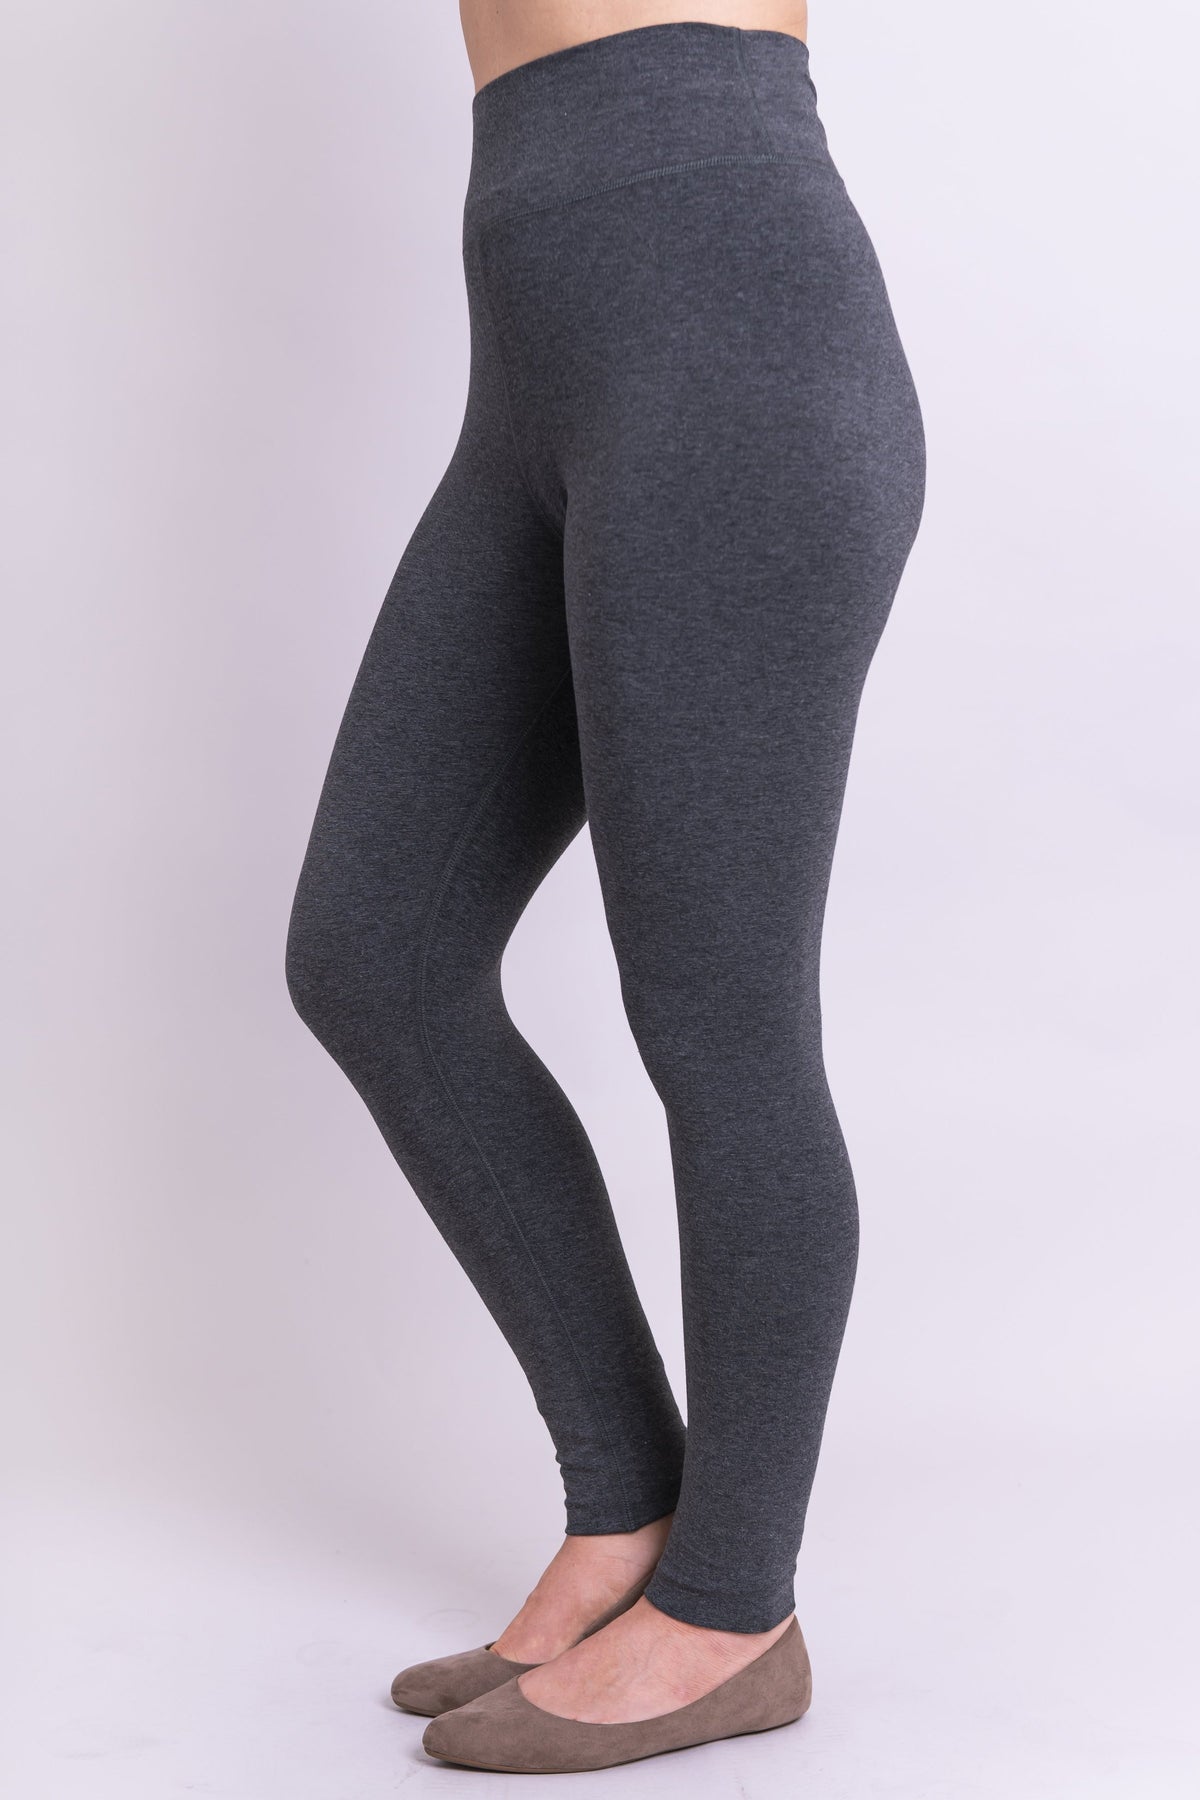 Ideology Gradient Leggings (Charcoal top to grayish bottom) Size S